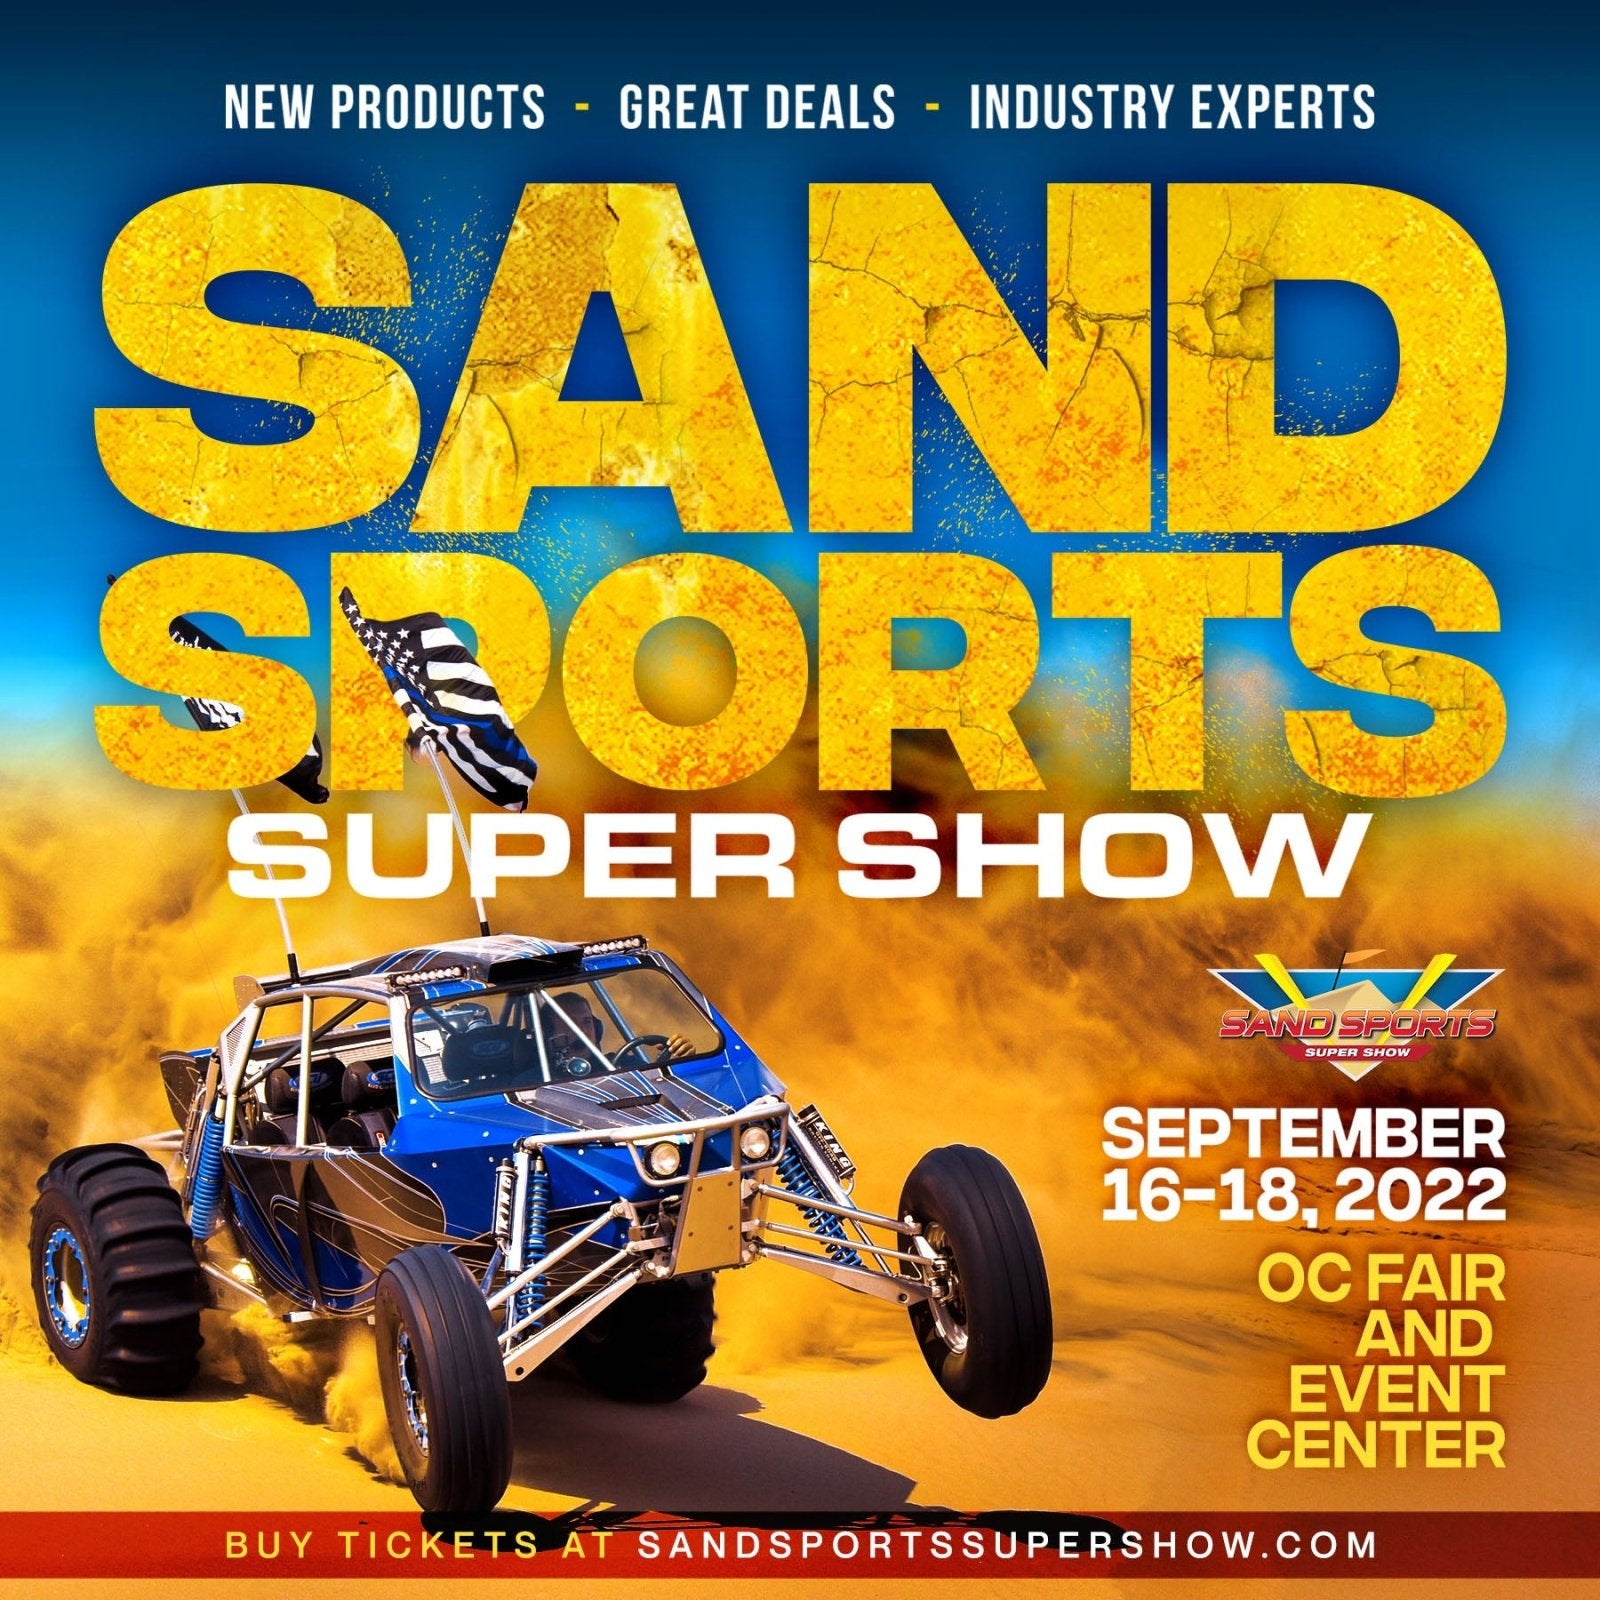 CHECK US OUT AT SAND SPORT SUPER SHOW - Shreddy